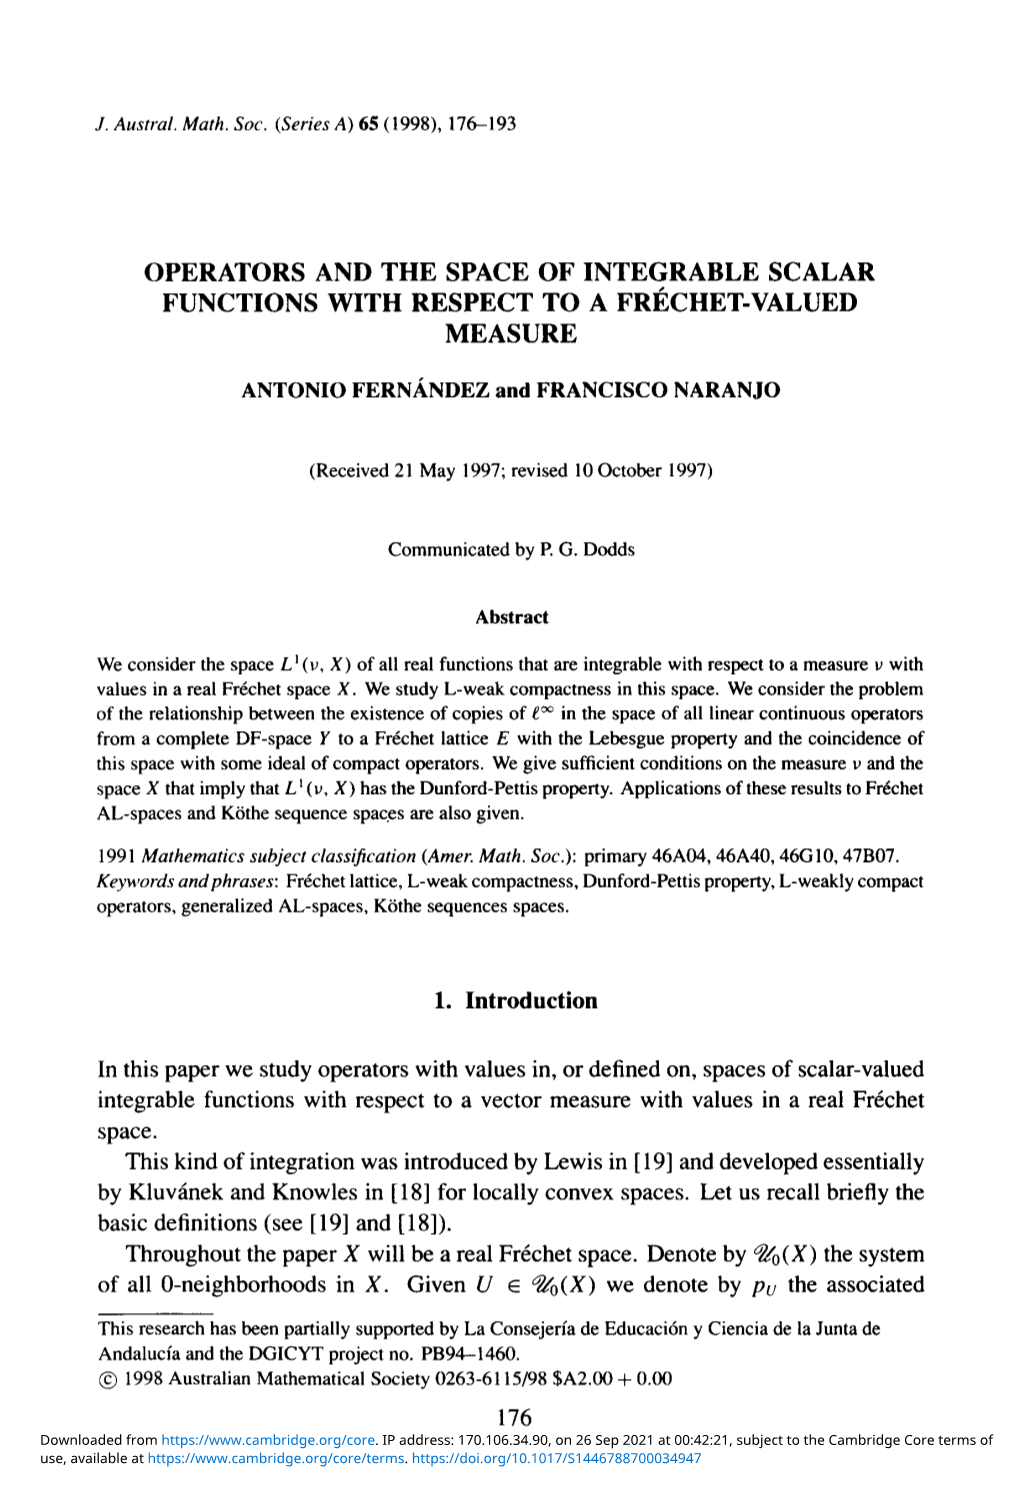 Operators and the Space of Integrable Scalar Functions with Respect to a Frechet-Valued Measure